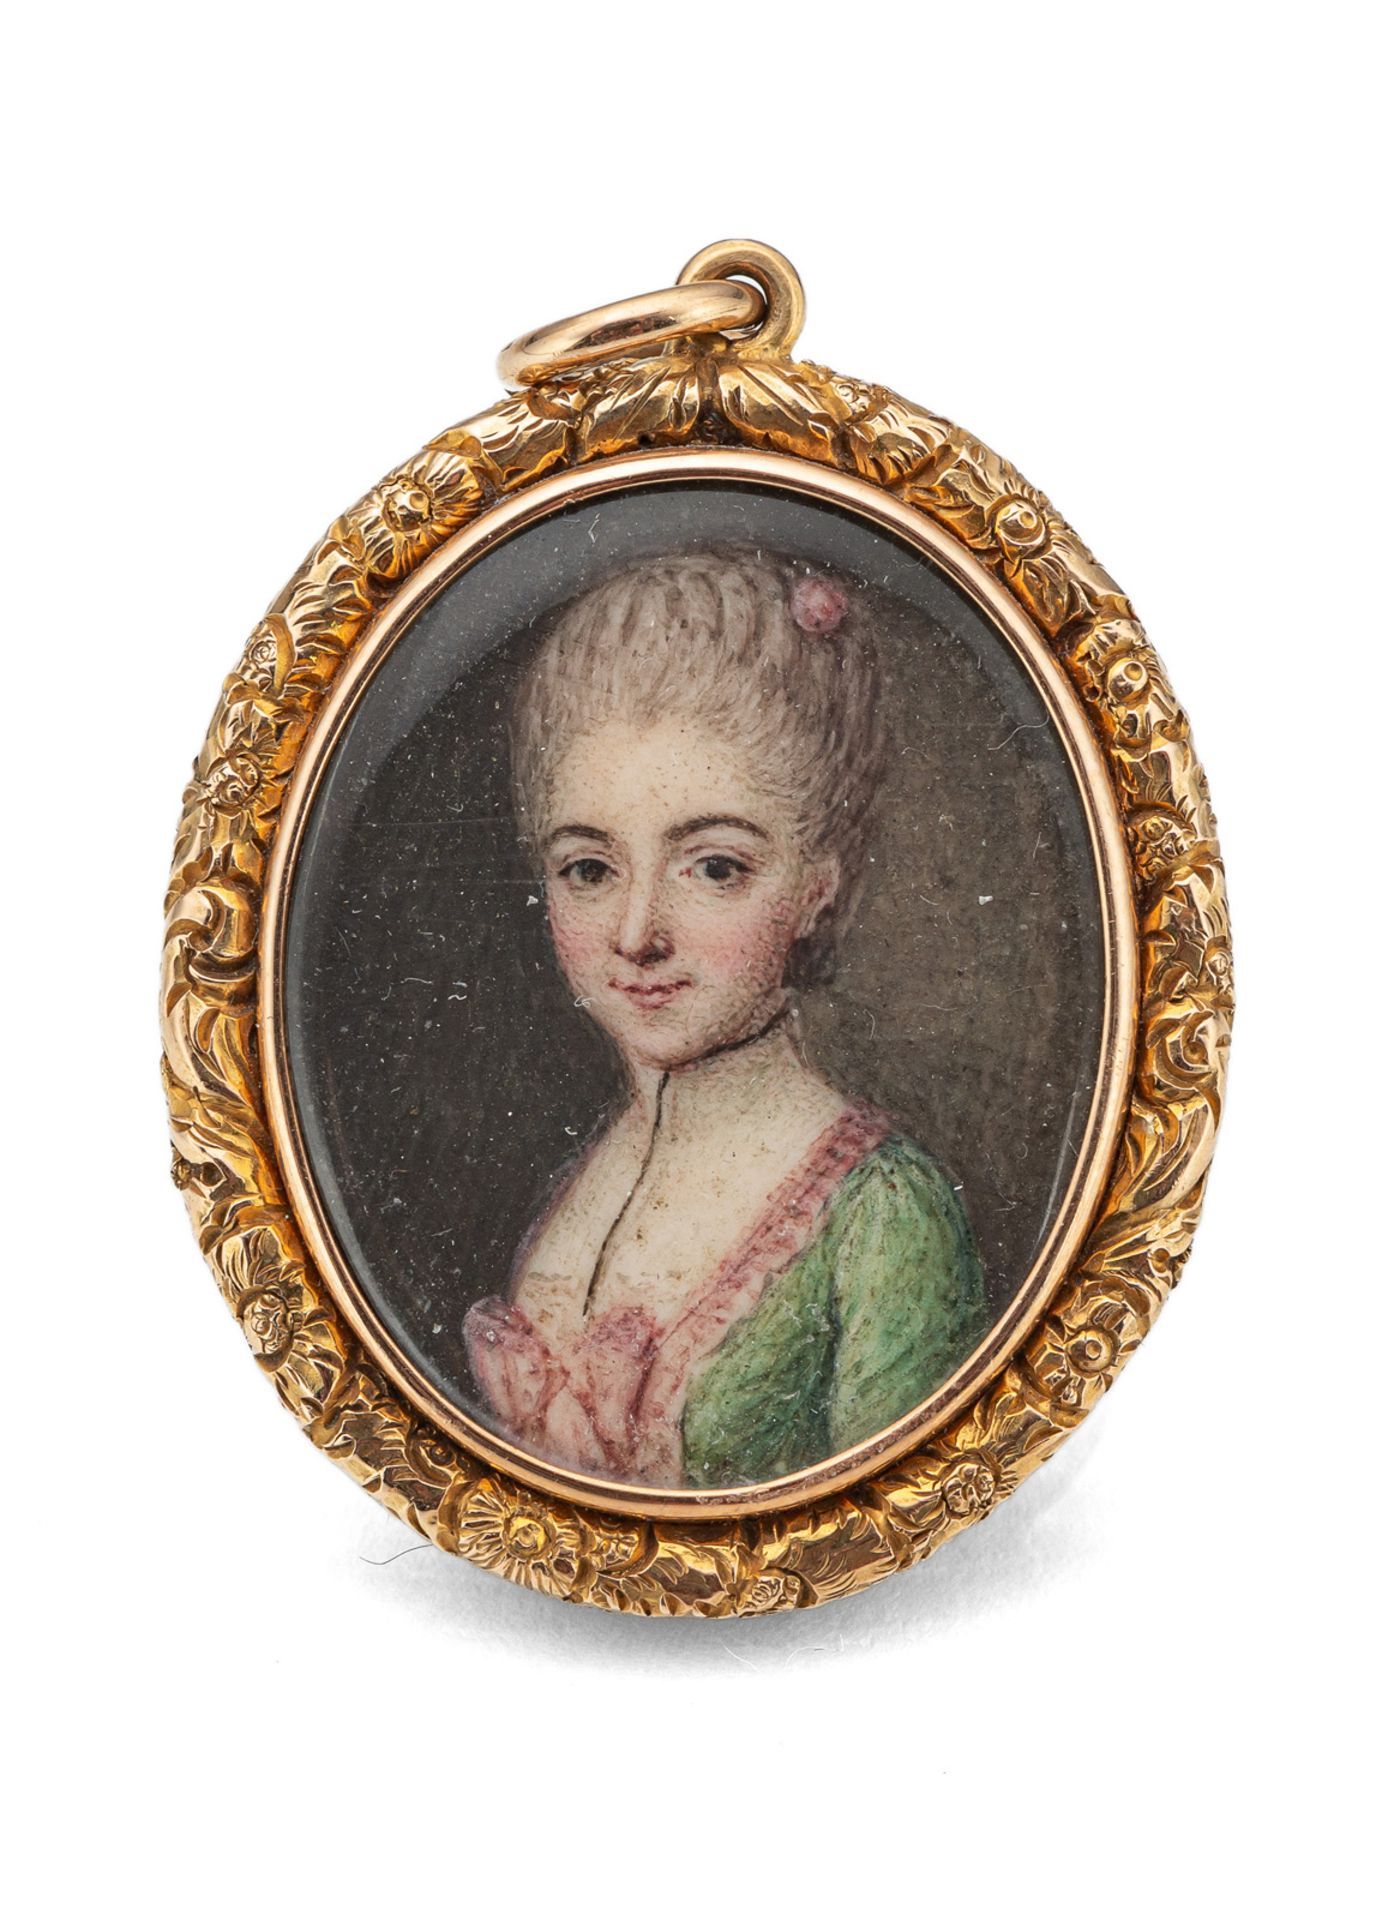 A MINIATUE PORTRAIT OF A YOUNG LADY IN A GREEN DRESS